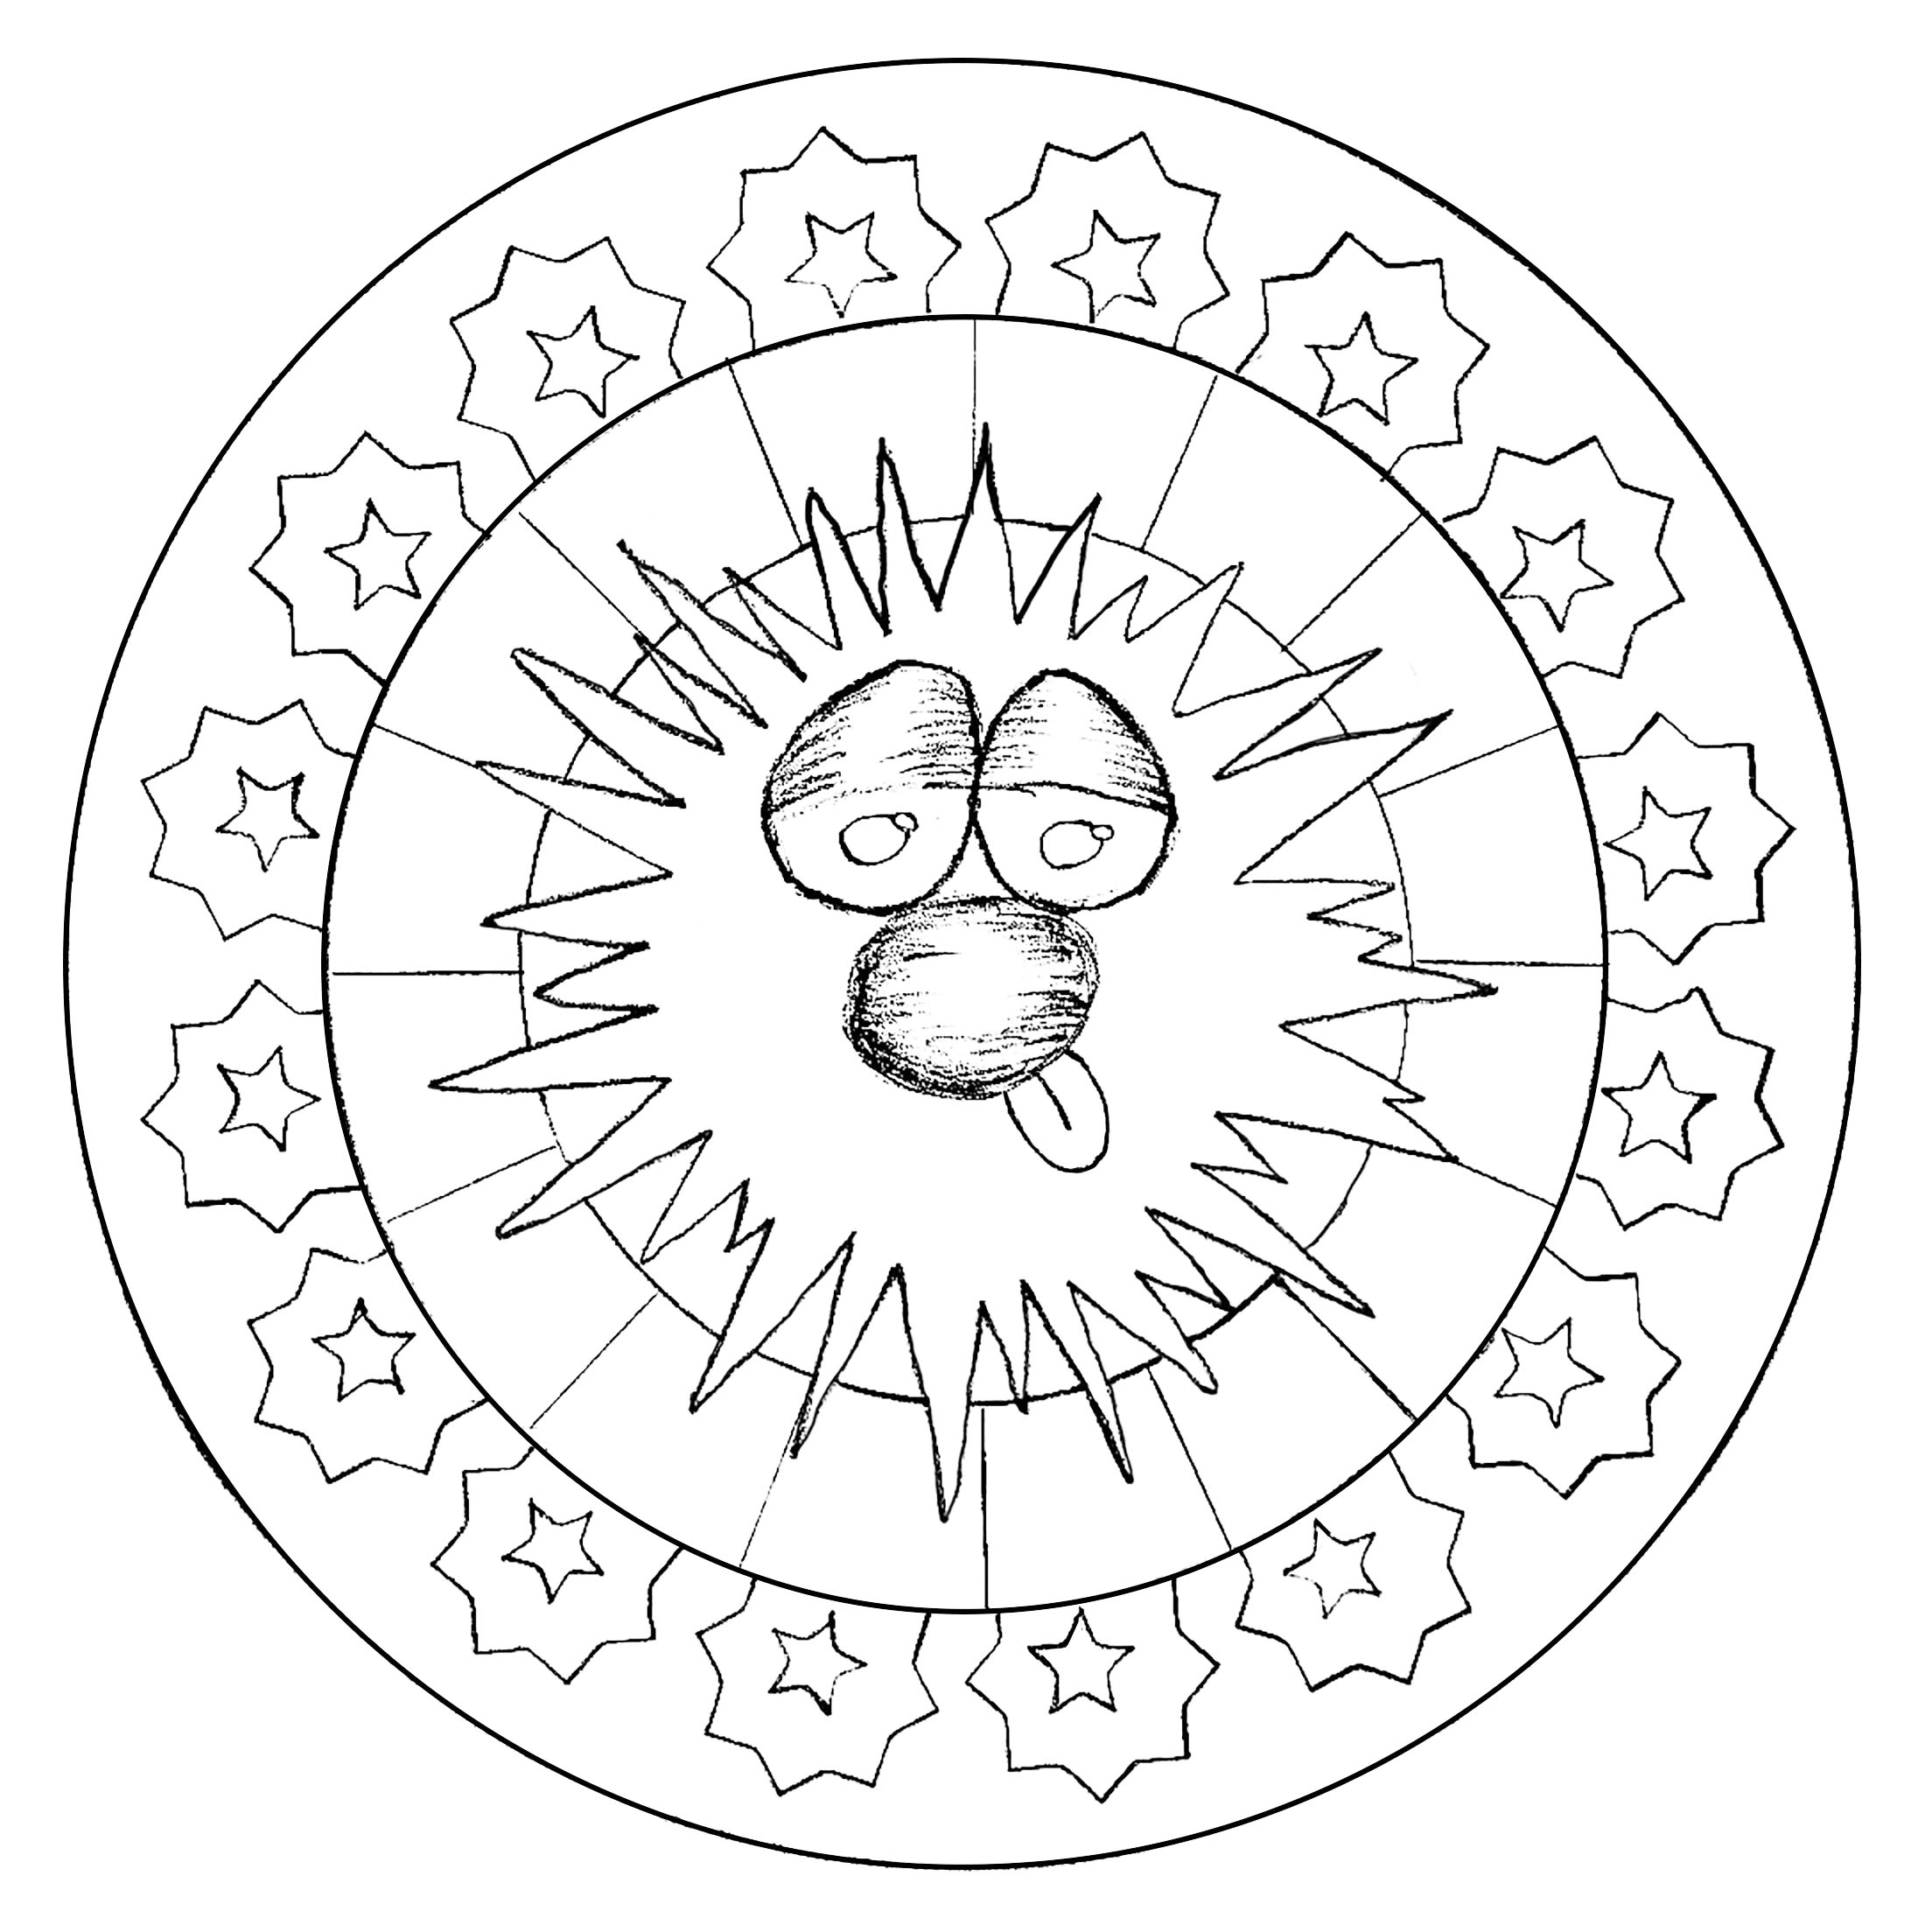 A mandala coloring page for the children, very easy. Coloring is proven therapeutic for some kids. They vent their feelings, frustrations and other emotions though coloring.